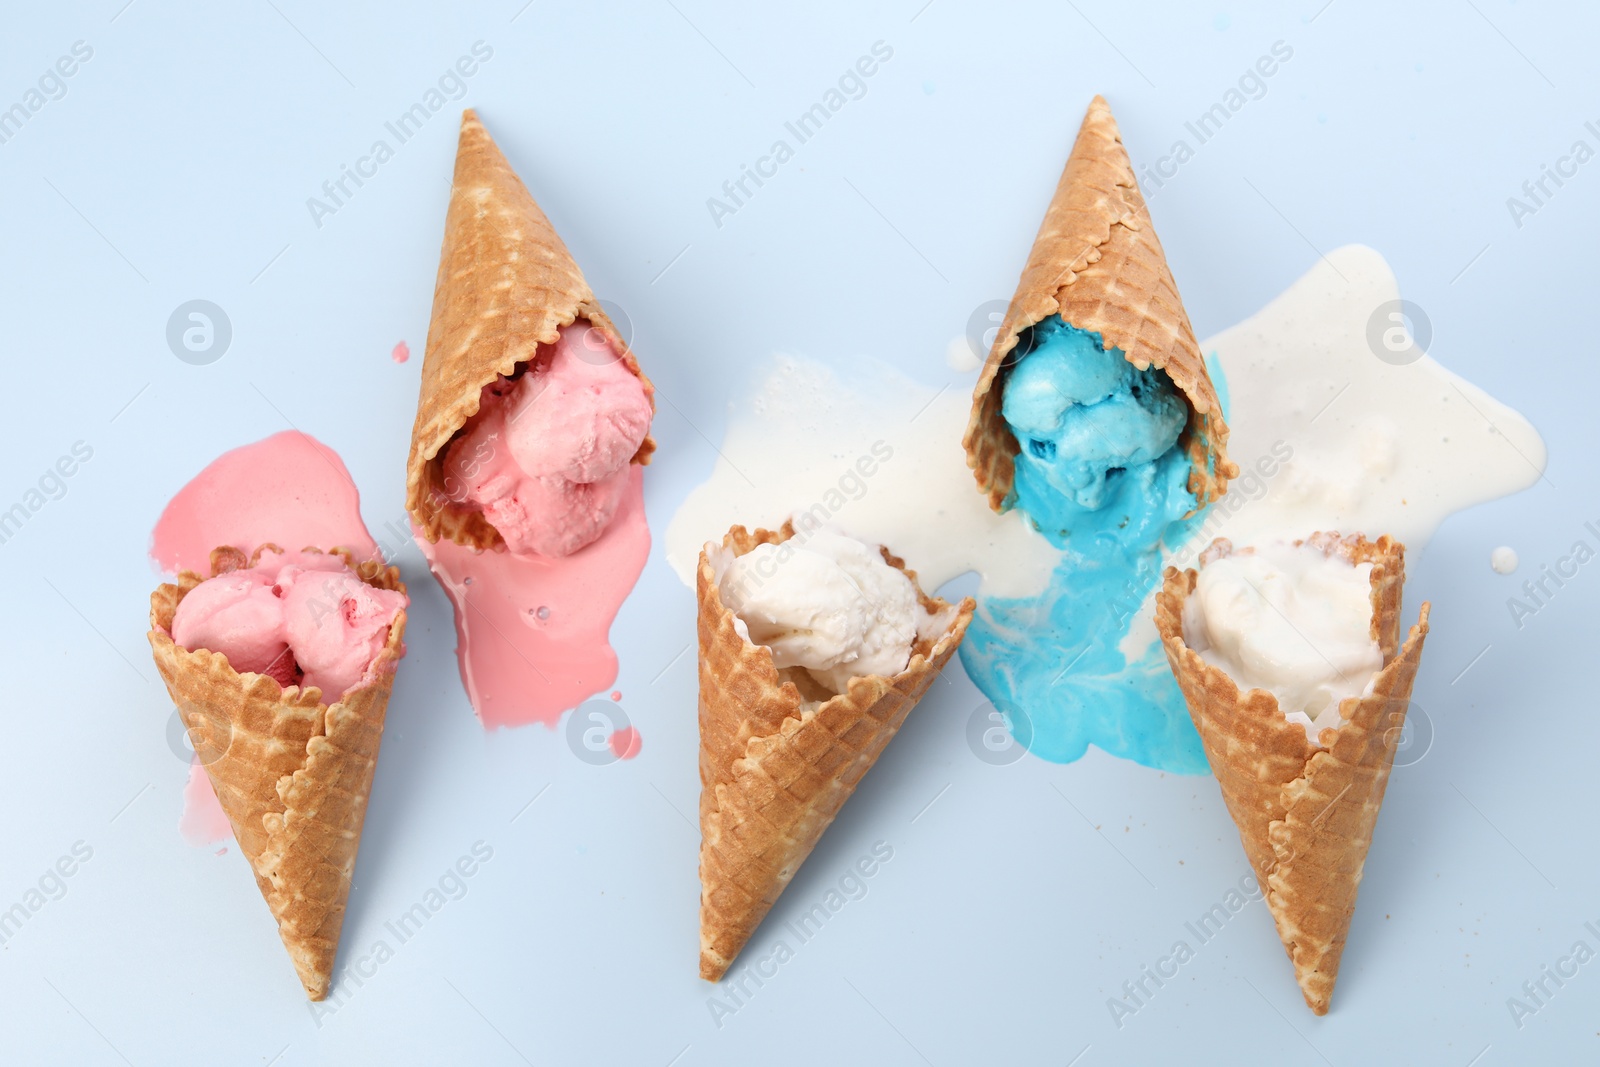 Photo of Melted ice cream in wafer cones on light blue background, flat lay